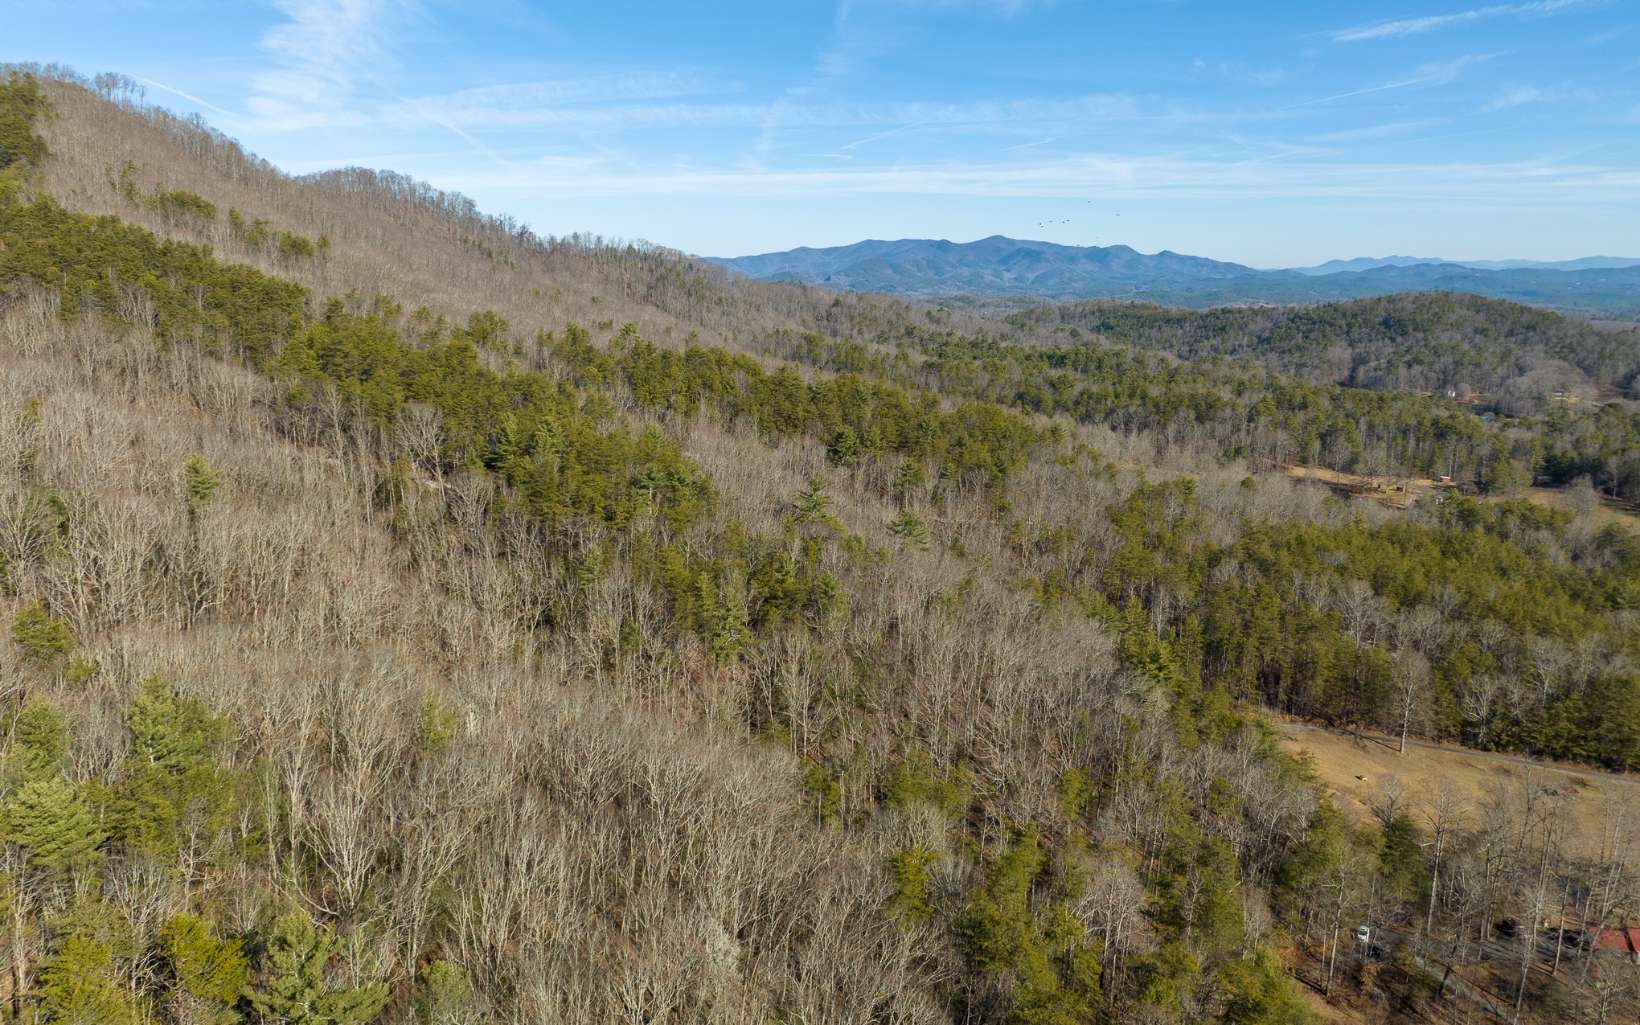 Ideal opportunity to build on 7.57 unrestricted acres in the pristine Cohutta Wilderness. Custom build your dream home. Enjoy peace, privacy, breathtaking mountain views and spectacular sunsets.Indulge in fishing and hiking in the splendor of the unique and stunning landscape. Minutes from Toccoa River, Jacks River and the picturesque town McCaysville -lined with Riverwalk shops, top-notch restaurants, boutique shopping, and the largest entertainment venue in North Georgia. Approx. 15 miles to Blue Ridge. Property has two access roads: Red Road (left) and gravel drive (right) Truck is recommended to access gravel drive due to steep incline. Please bypass "Private Property" sign/gate.